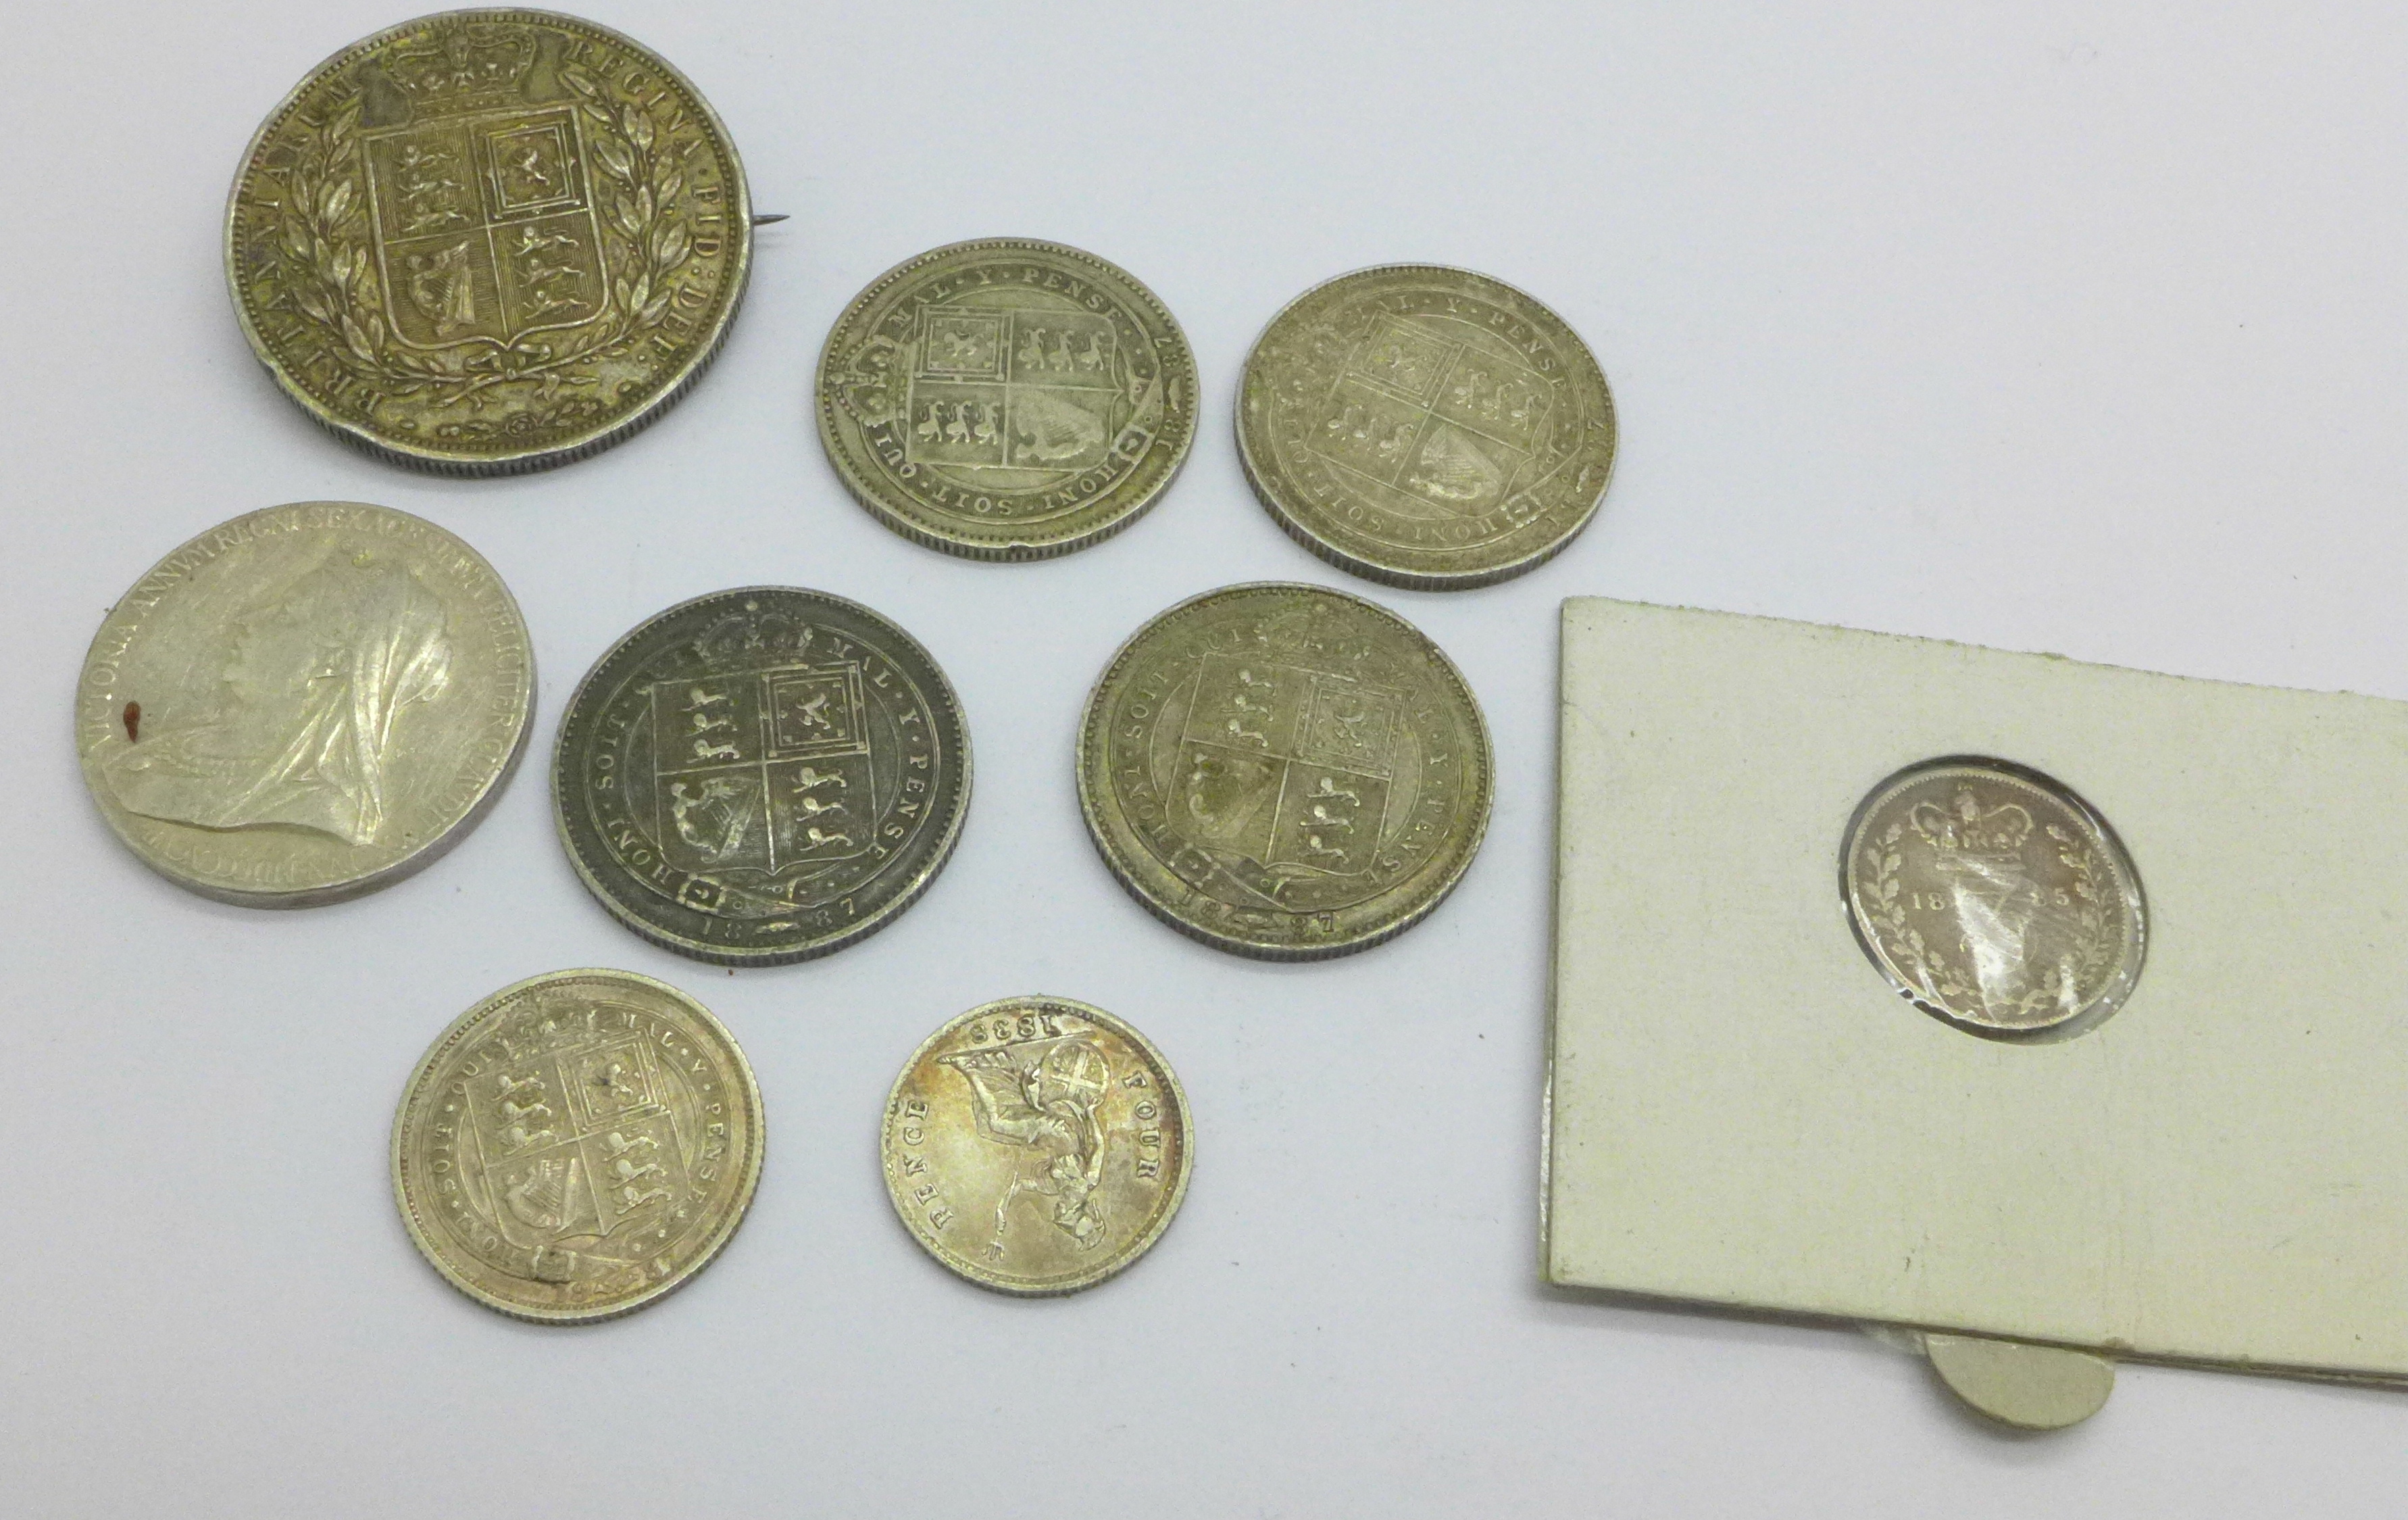 Nine Victorian silver coins, including an 1838 four pence and an 1838 half crown with mounted pin